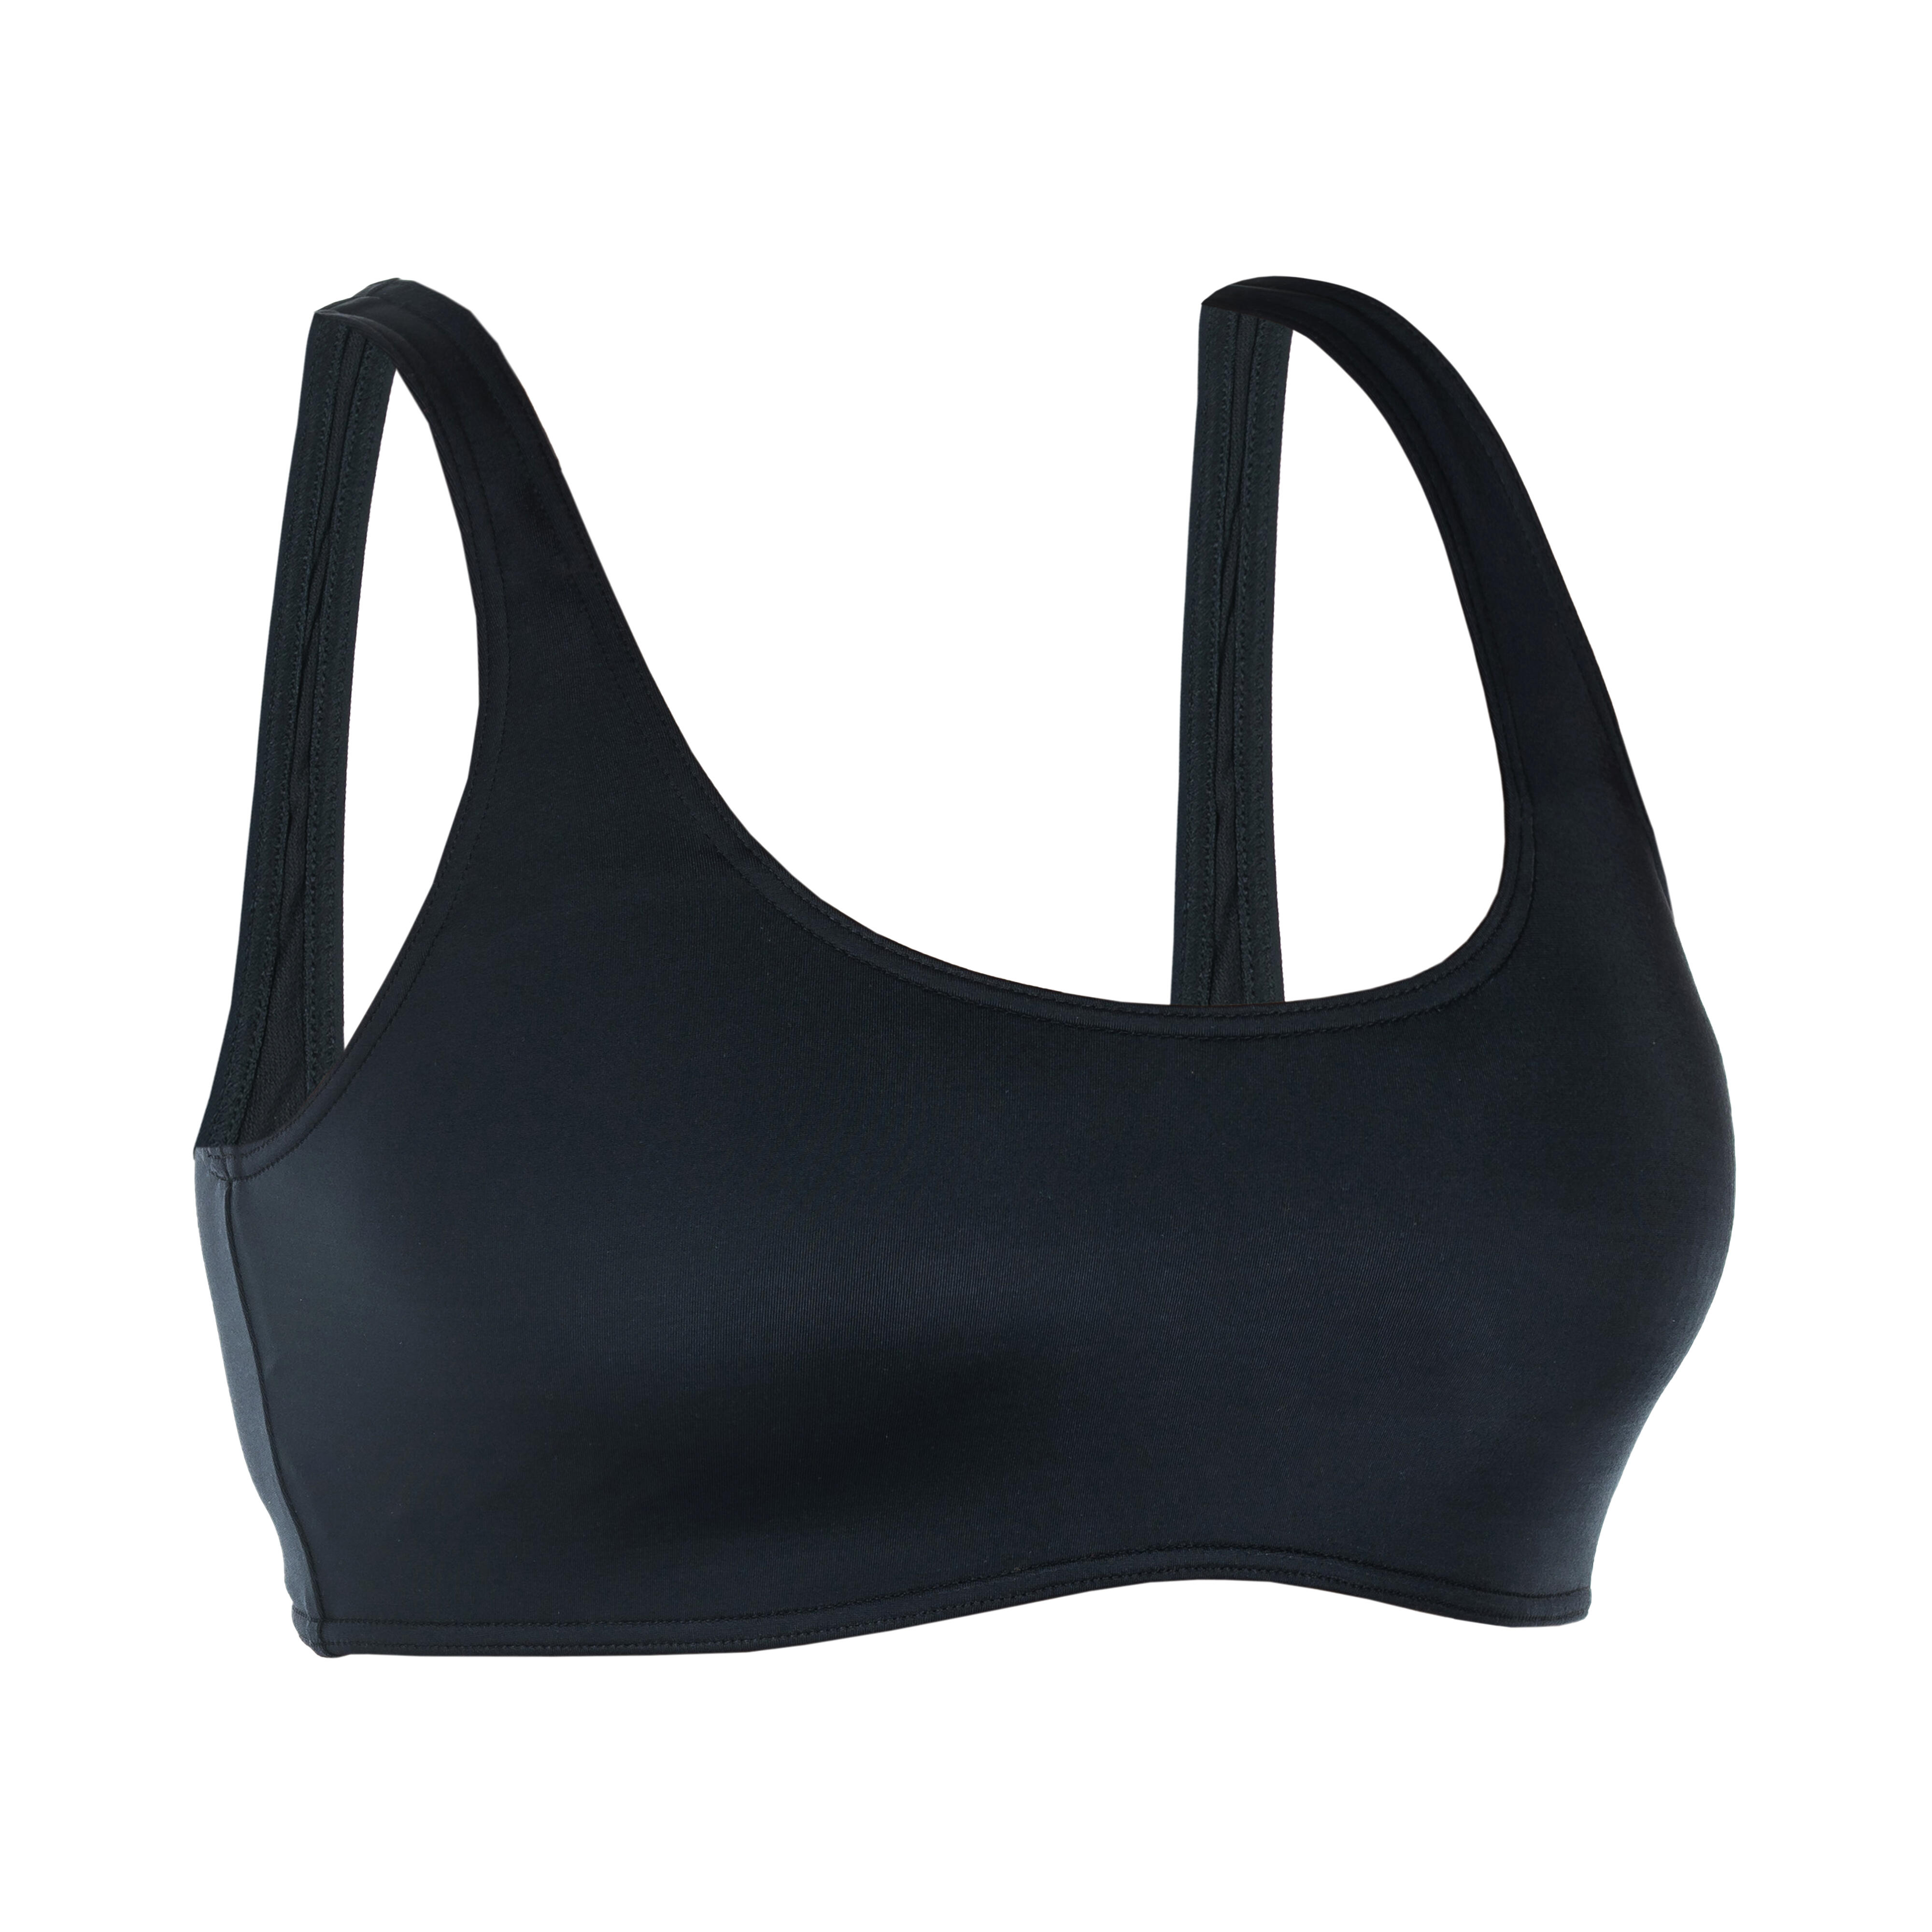 CROP TOP AURELY BLACK WITH REMOVABLE CUPS